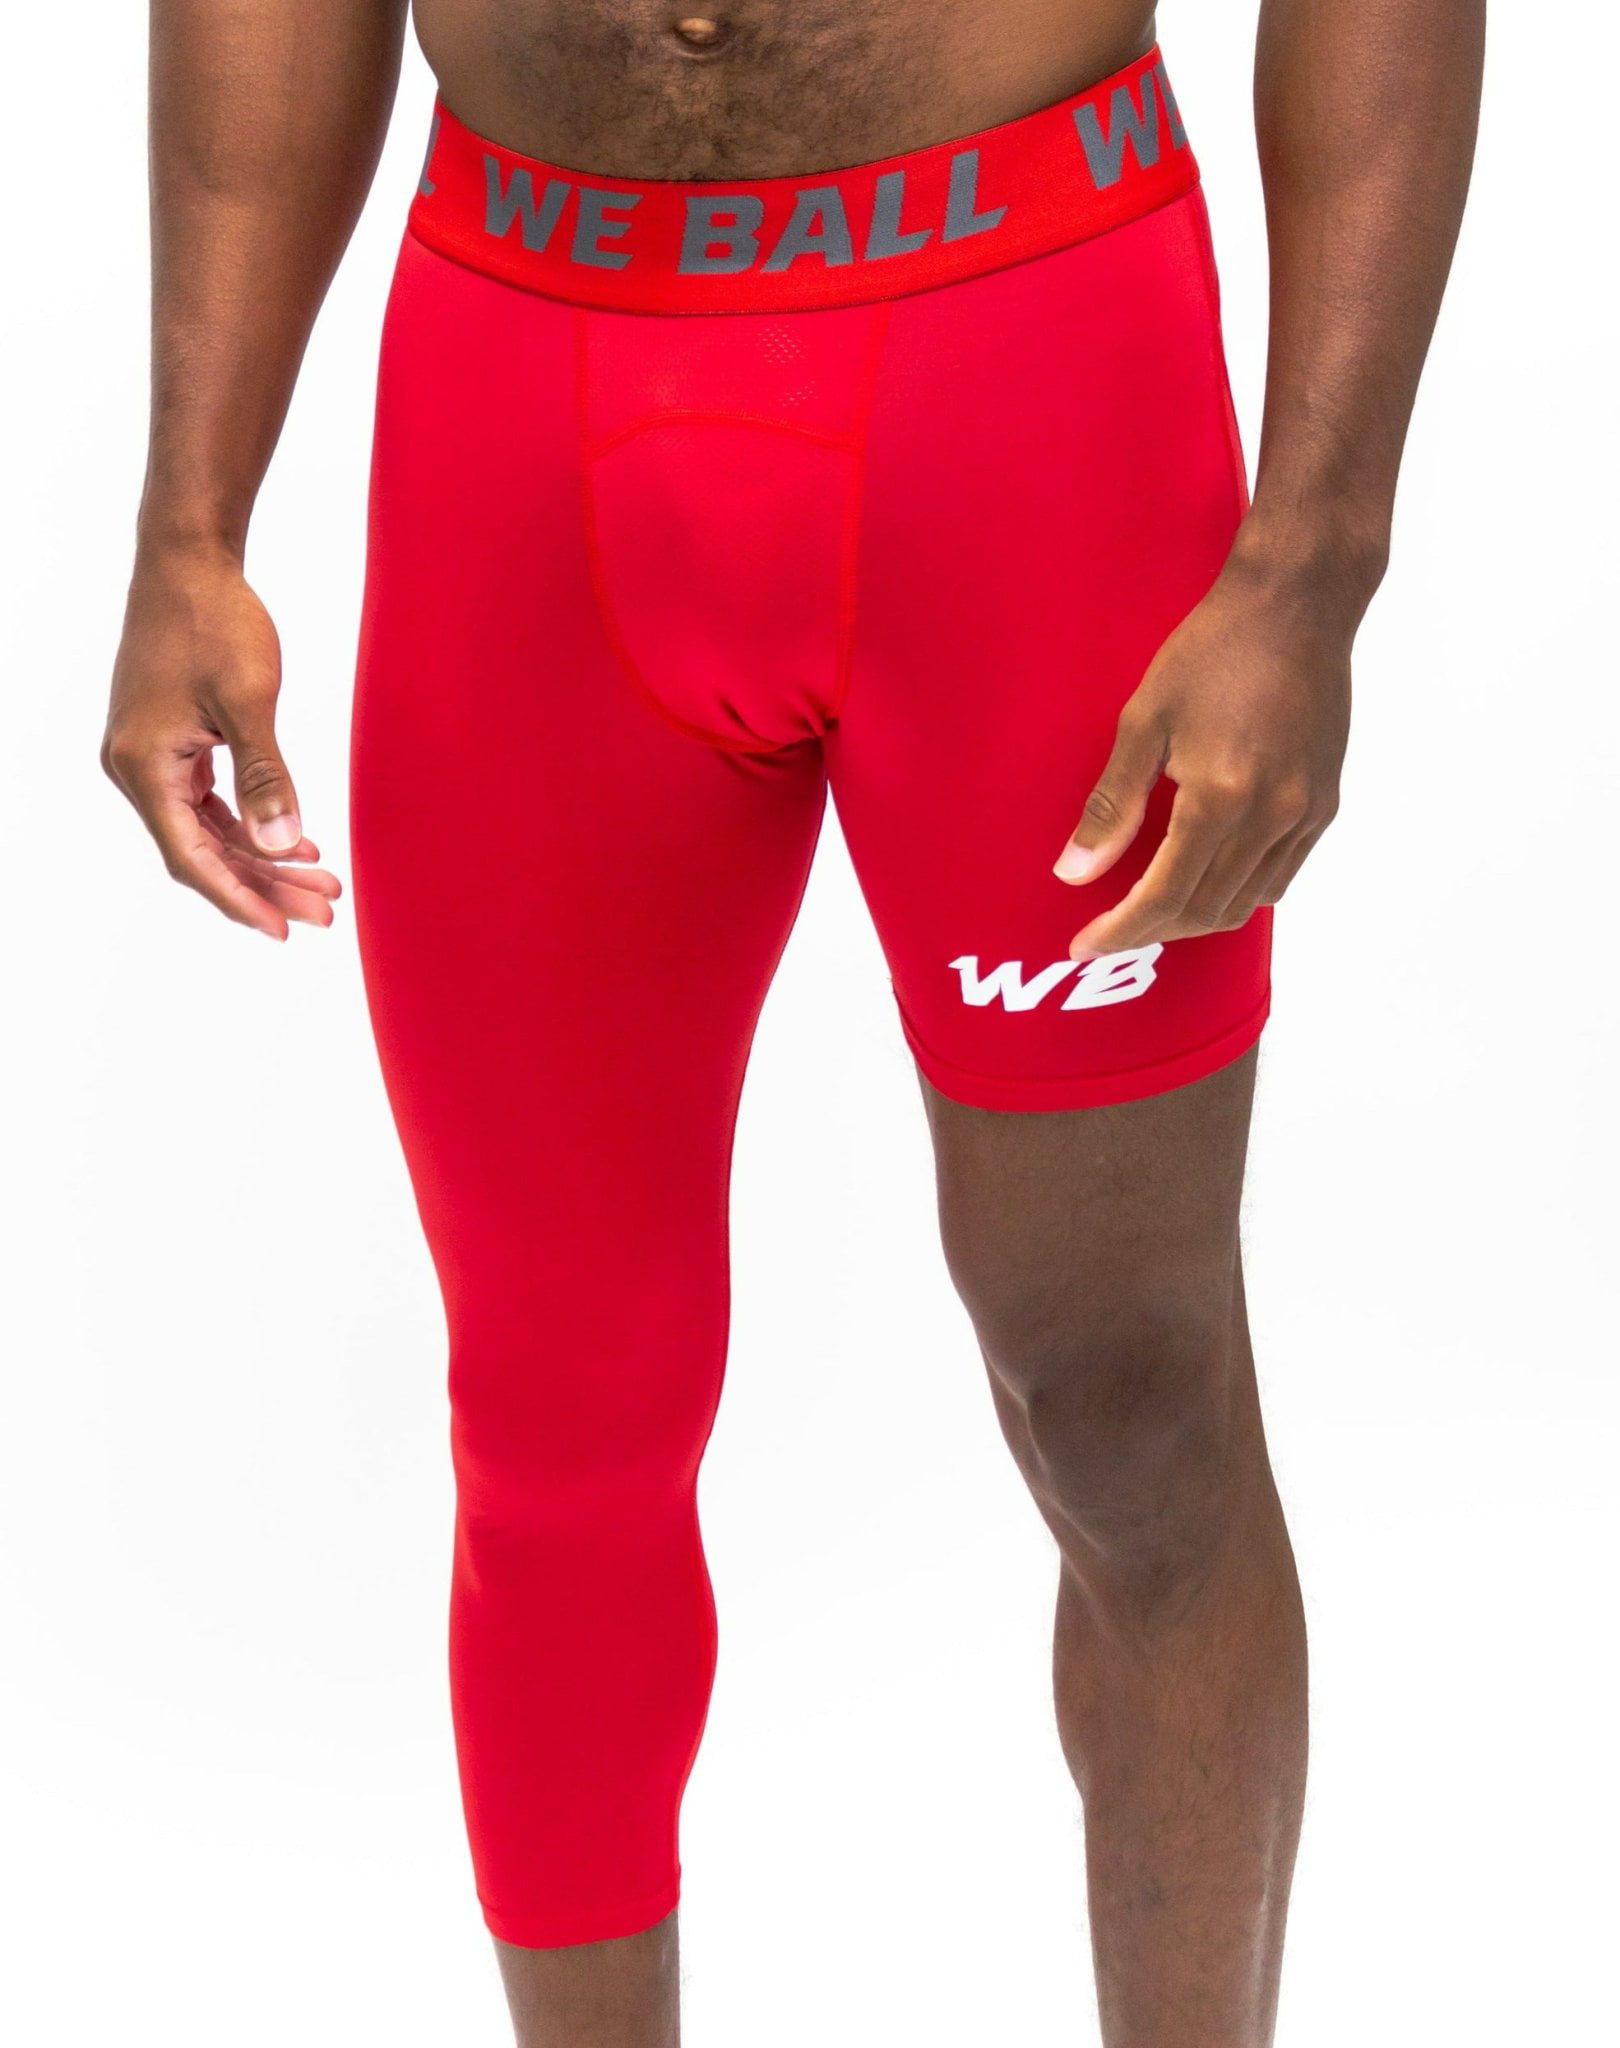 We Ball Sports Athletic Men's Single Leg Sports Tights | One Leg  Compression Base Layer Leggings for Men (Red, FULL 2XL)